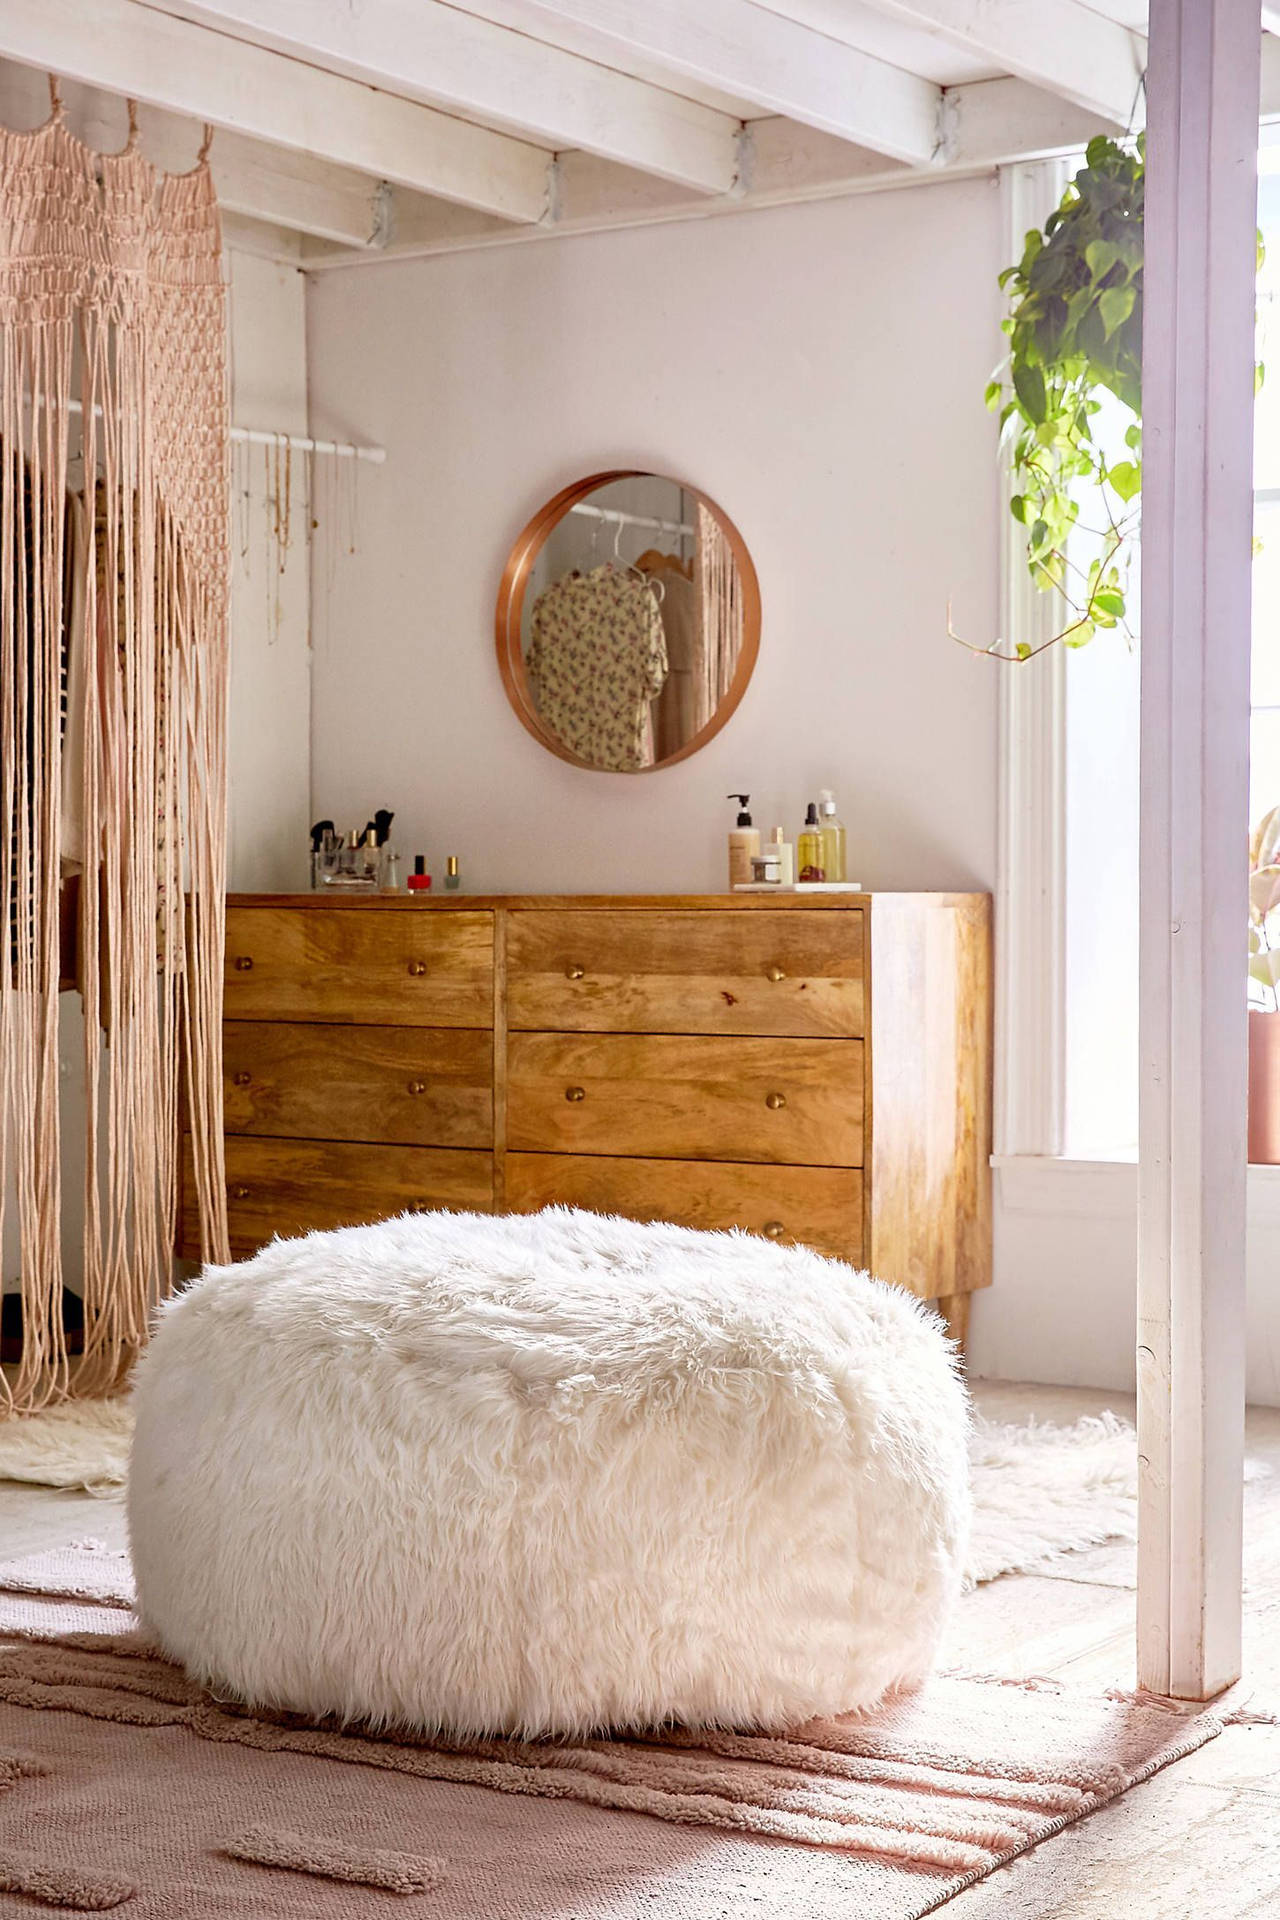 Round Fur Couch Inside A Stylish Room Wallpaper